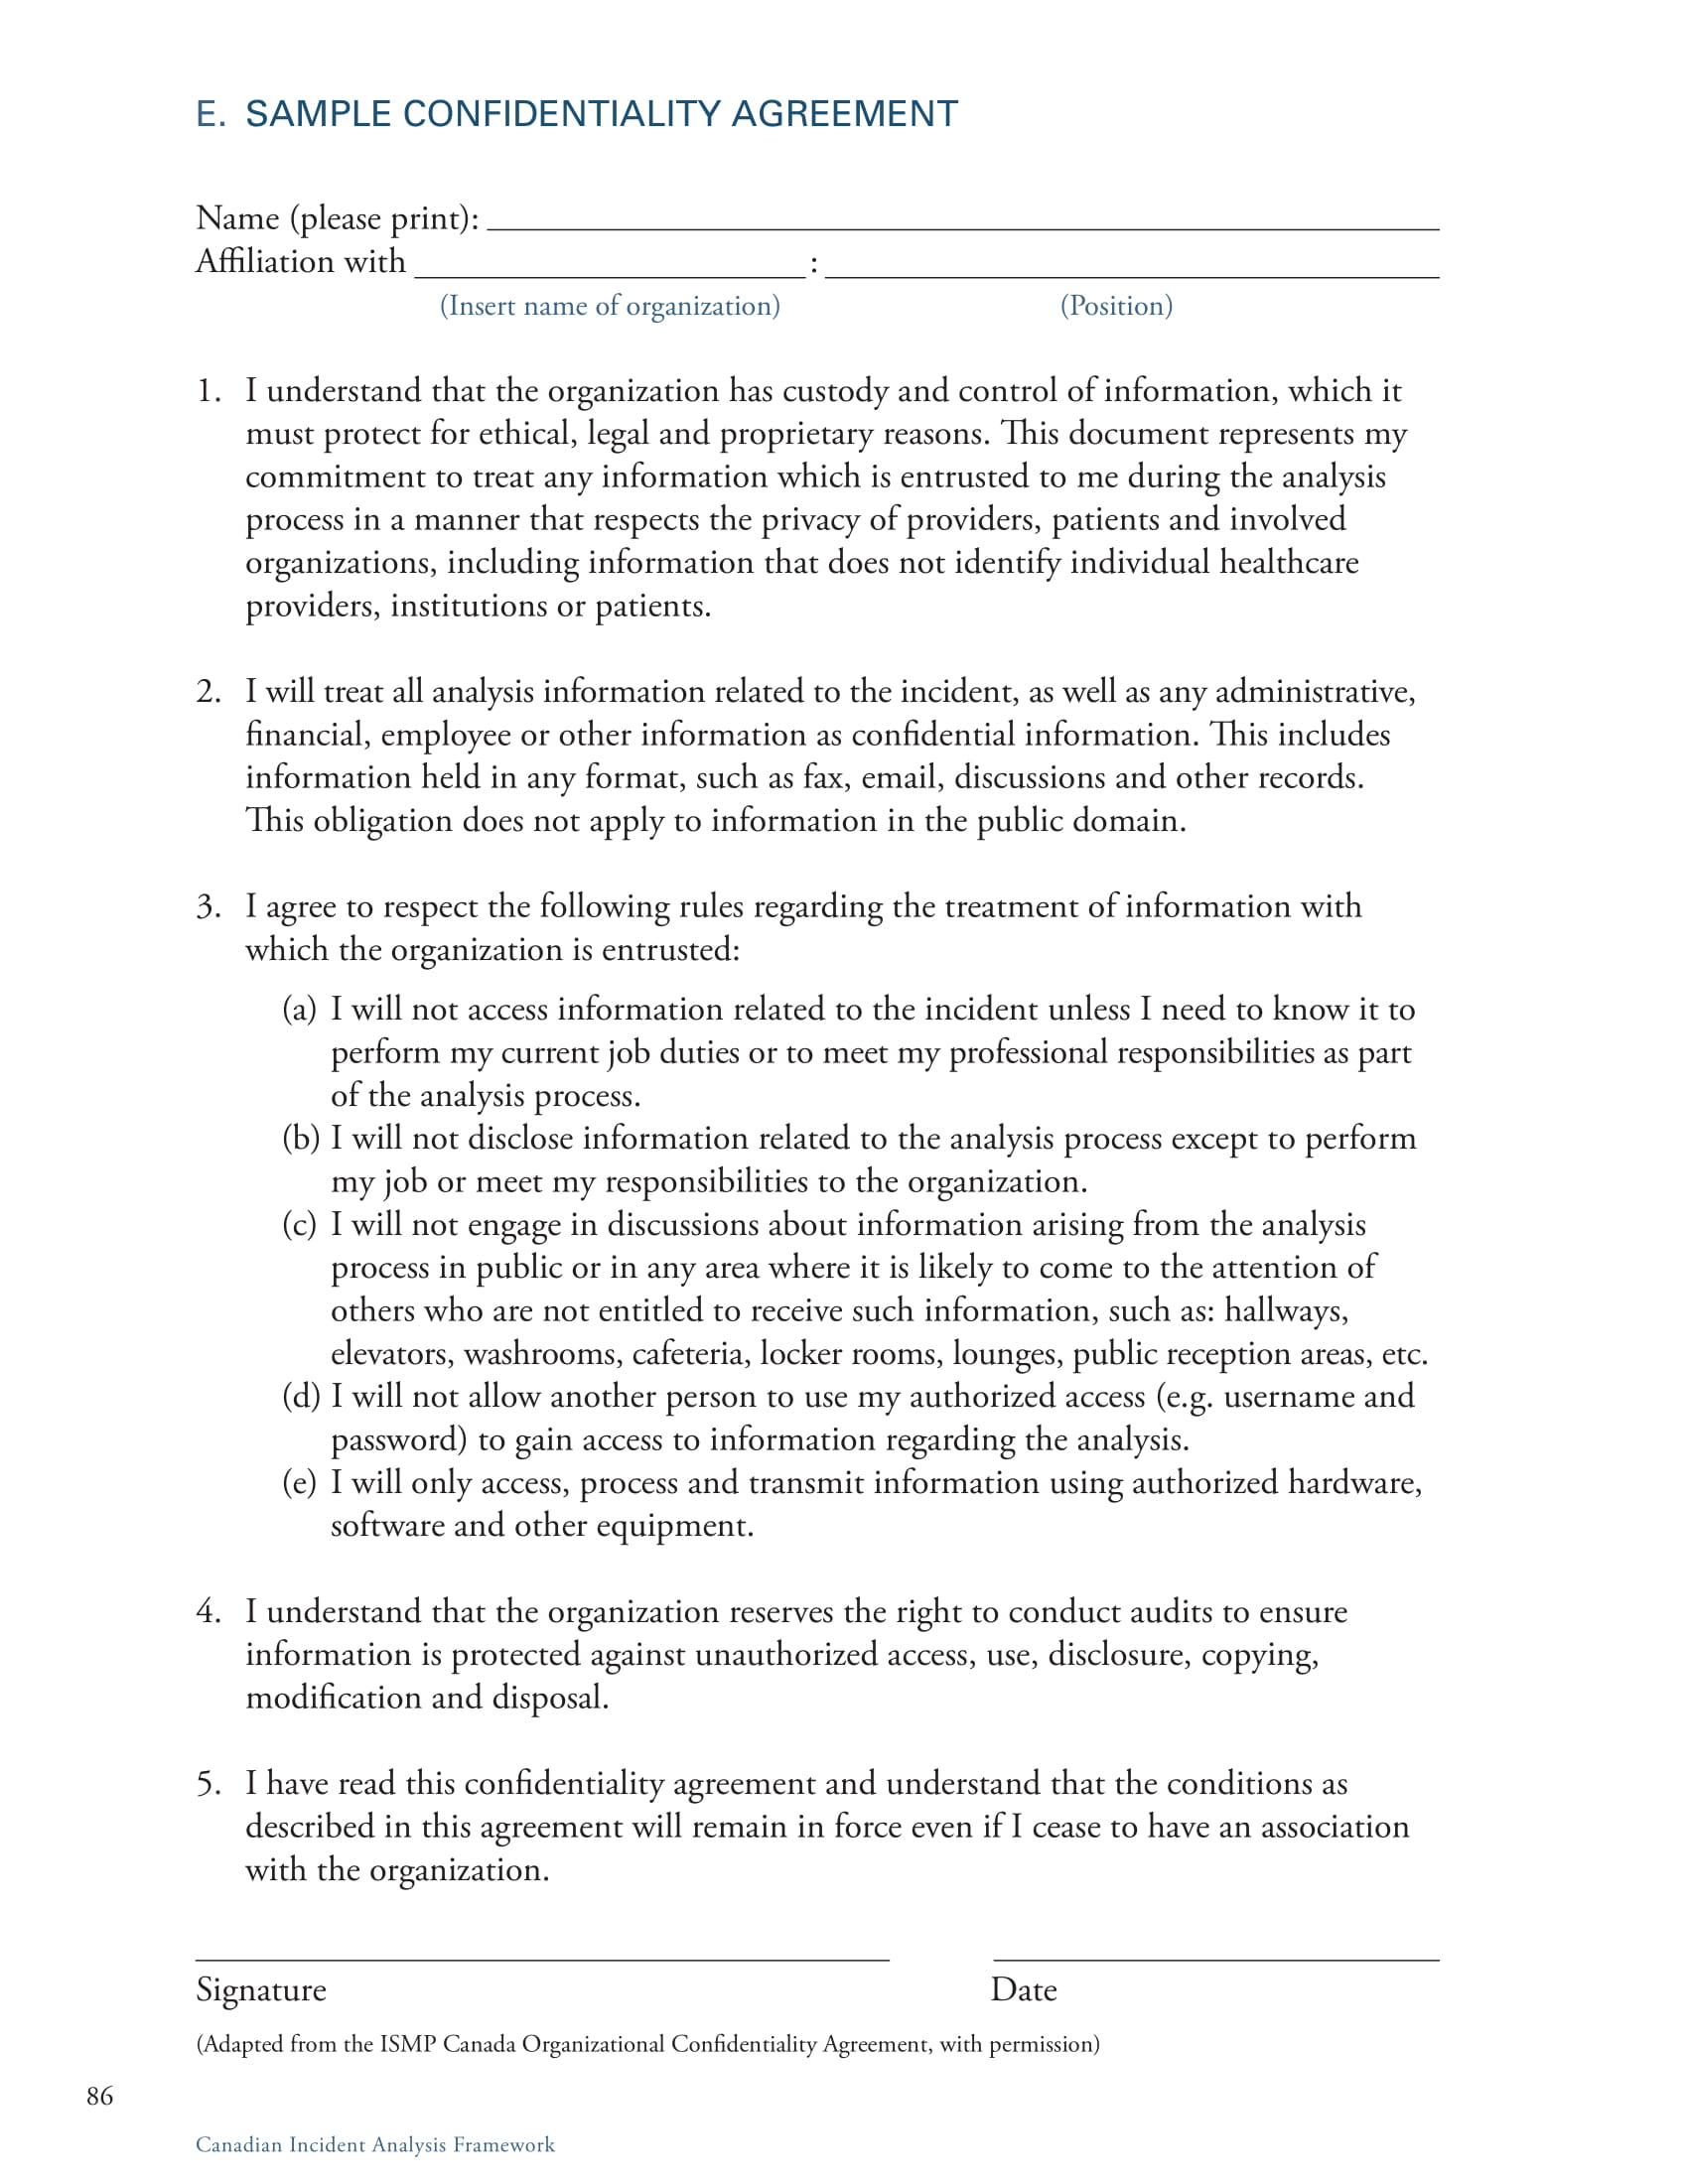 incident analysis confidentiality agreement example